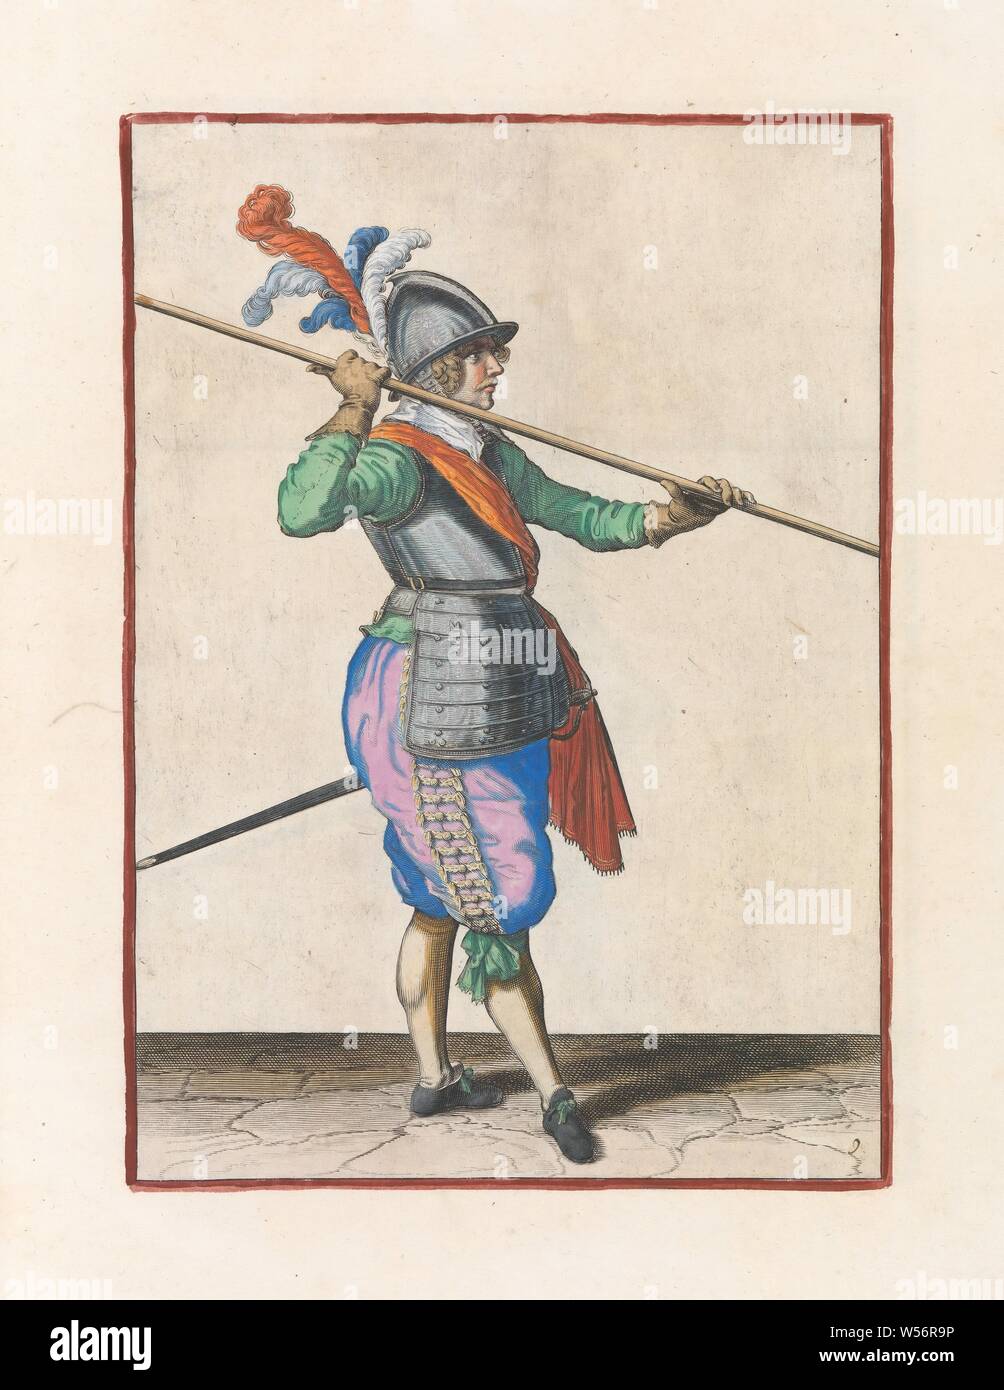 Soldier carrying his skewer almost horizontally above his right shoulder Corte onderwysinghe on the figuerliicke imagehe, important right ghebruyck, from all the time a Soldaet is acting of the Spies need (original series title), A soldier, full-length, to the right, who carries a spear (lance) almost horizontally above his right shoulder. His hands far apart around the skewer. This is the second operation for lifting the skewer to the shoulder and carrying it horizontally. This print is part of the series of 32 hand-numbered prints of skewers in the Arms Act, handling of weapons, military Stock Photo